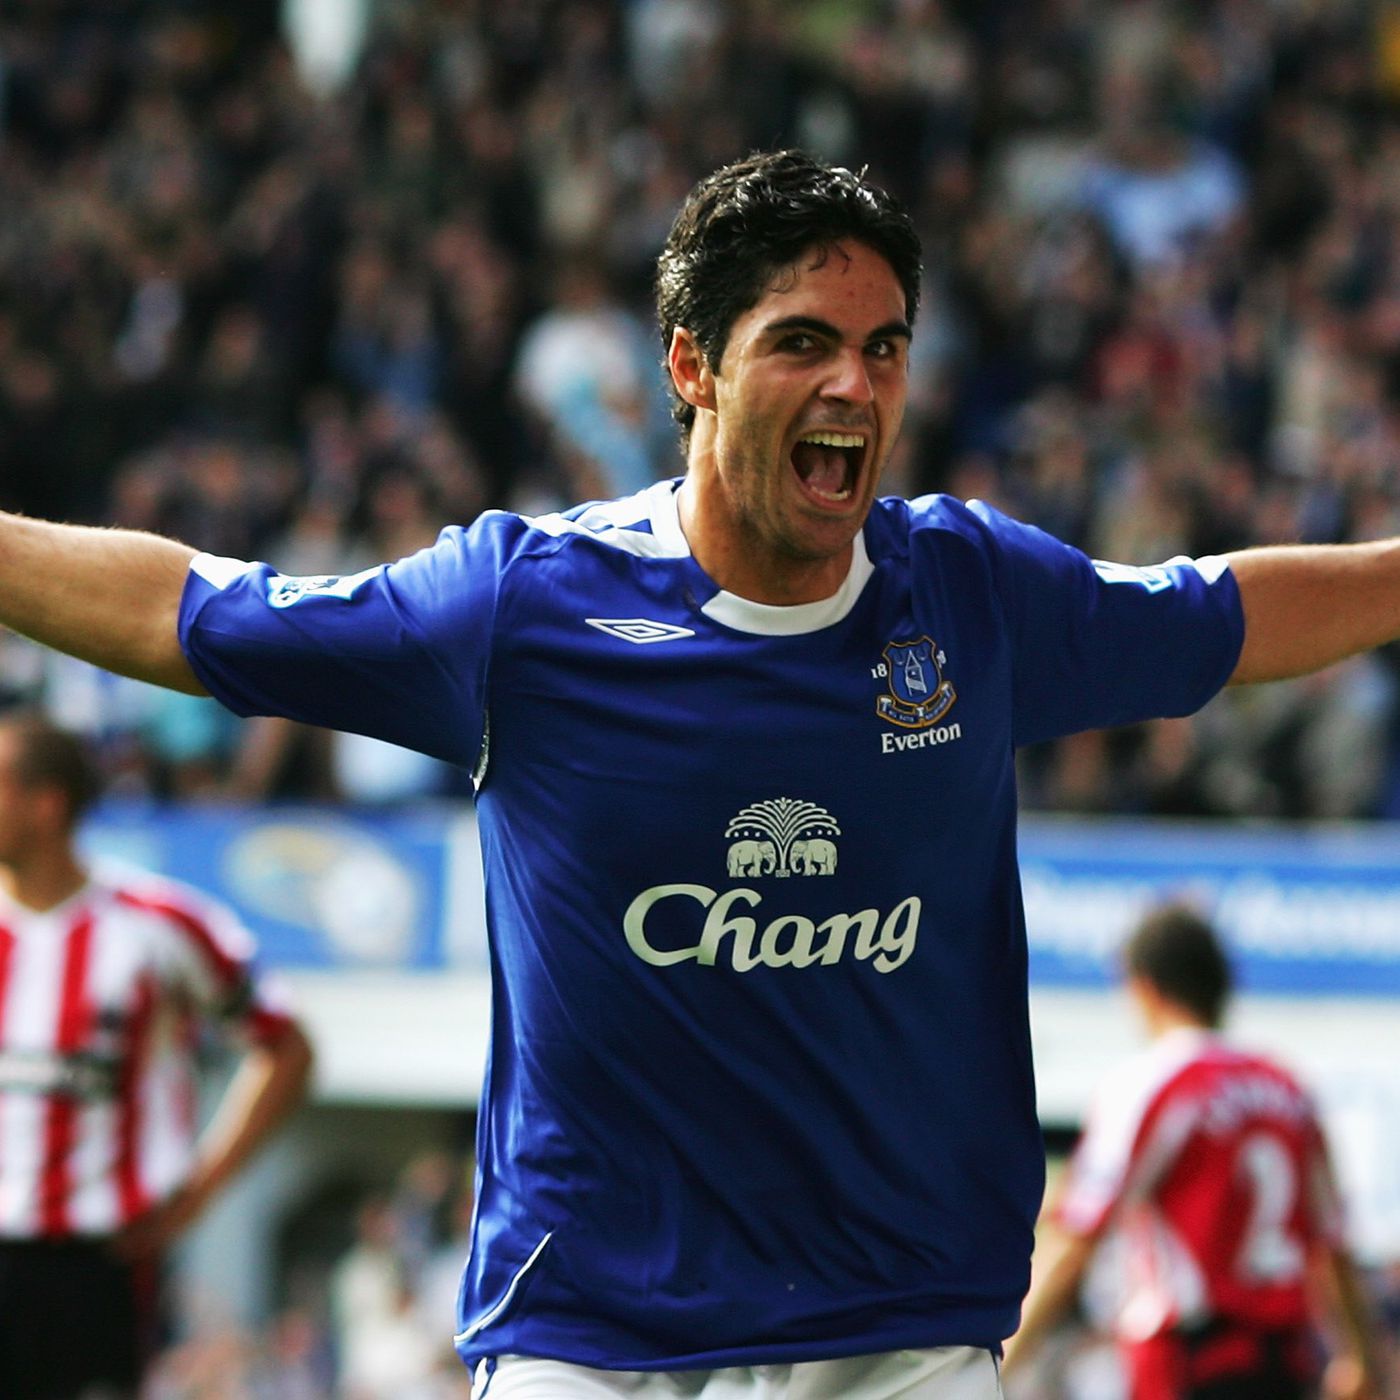 Mikel Arteta reportedly a candidate for next Everton manager - Royal Blue Mersey